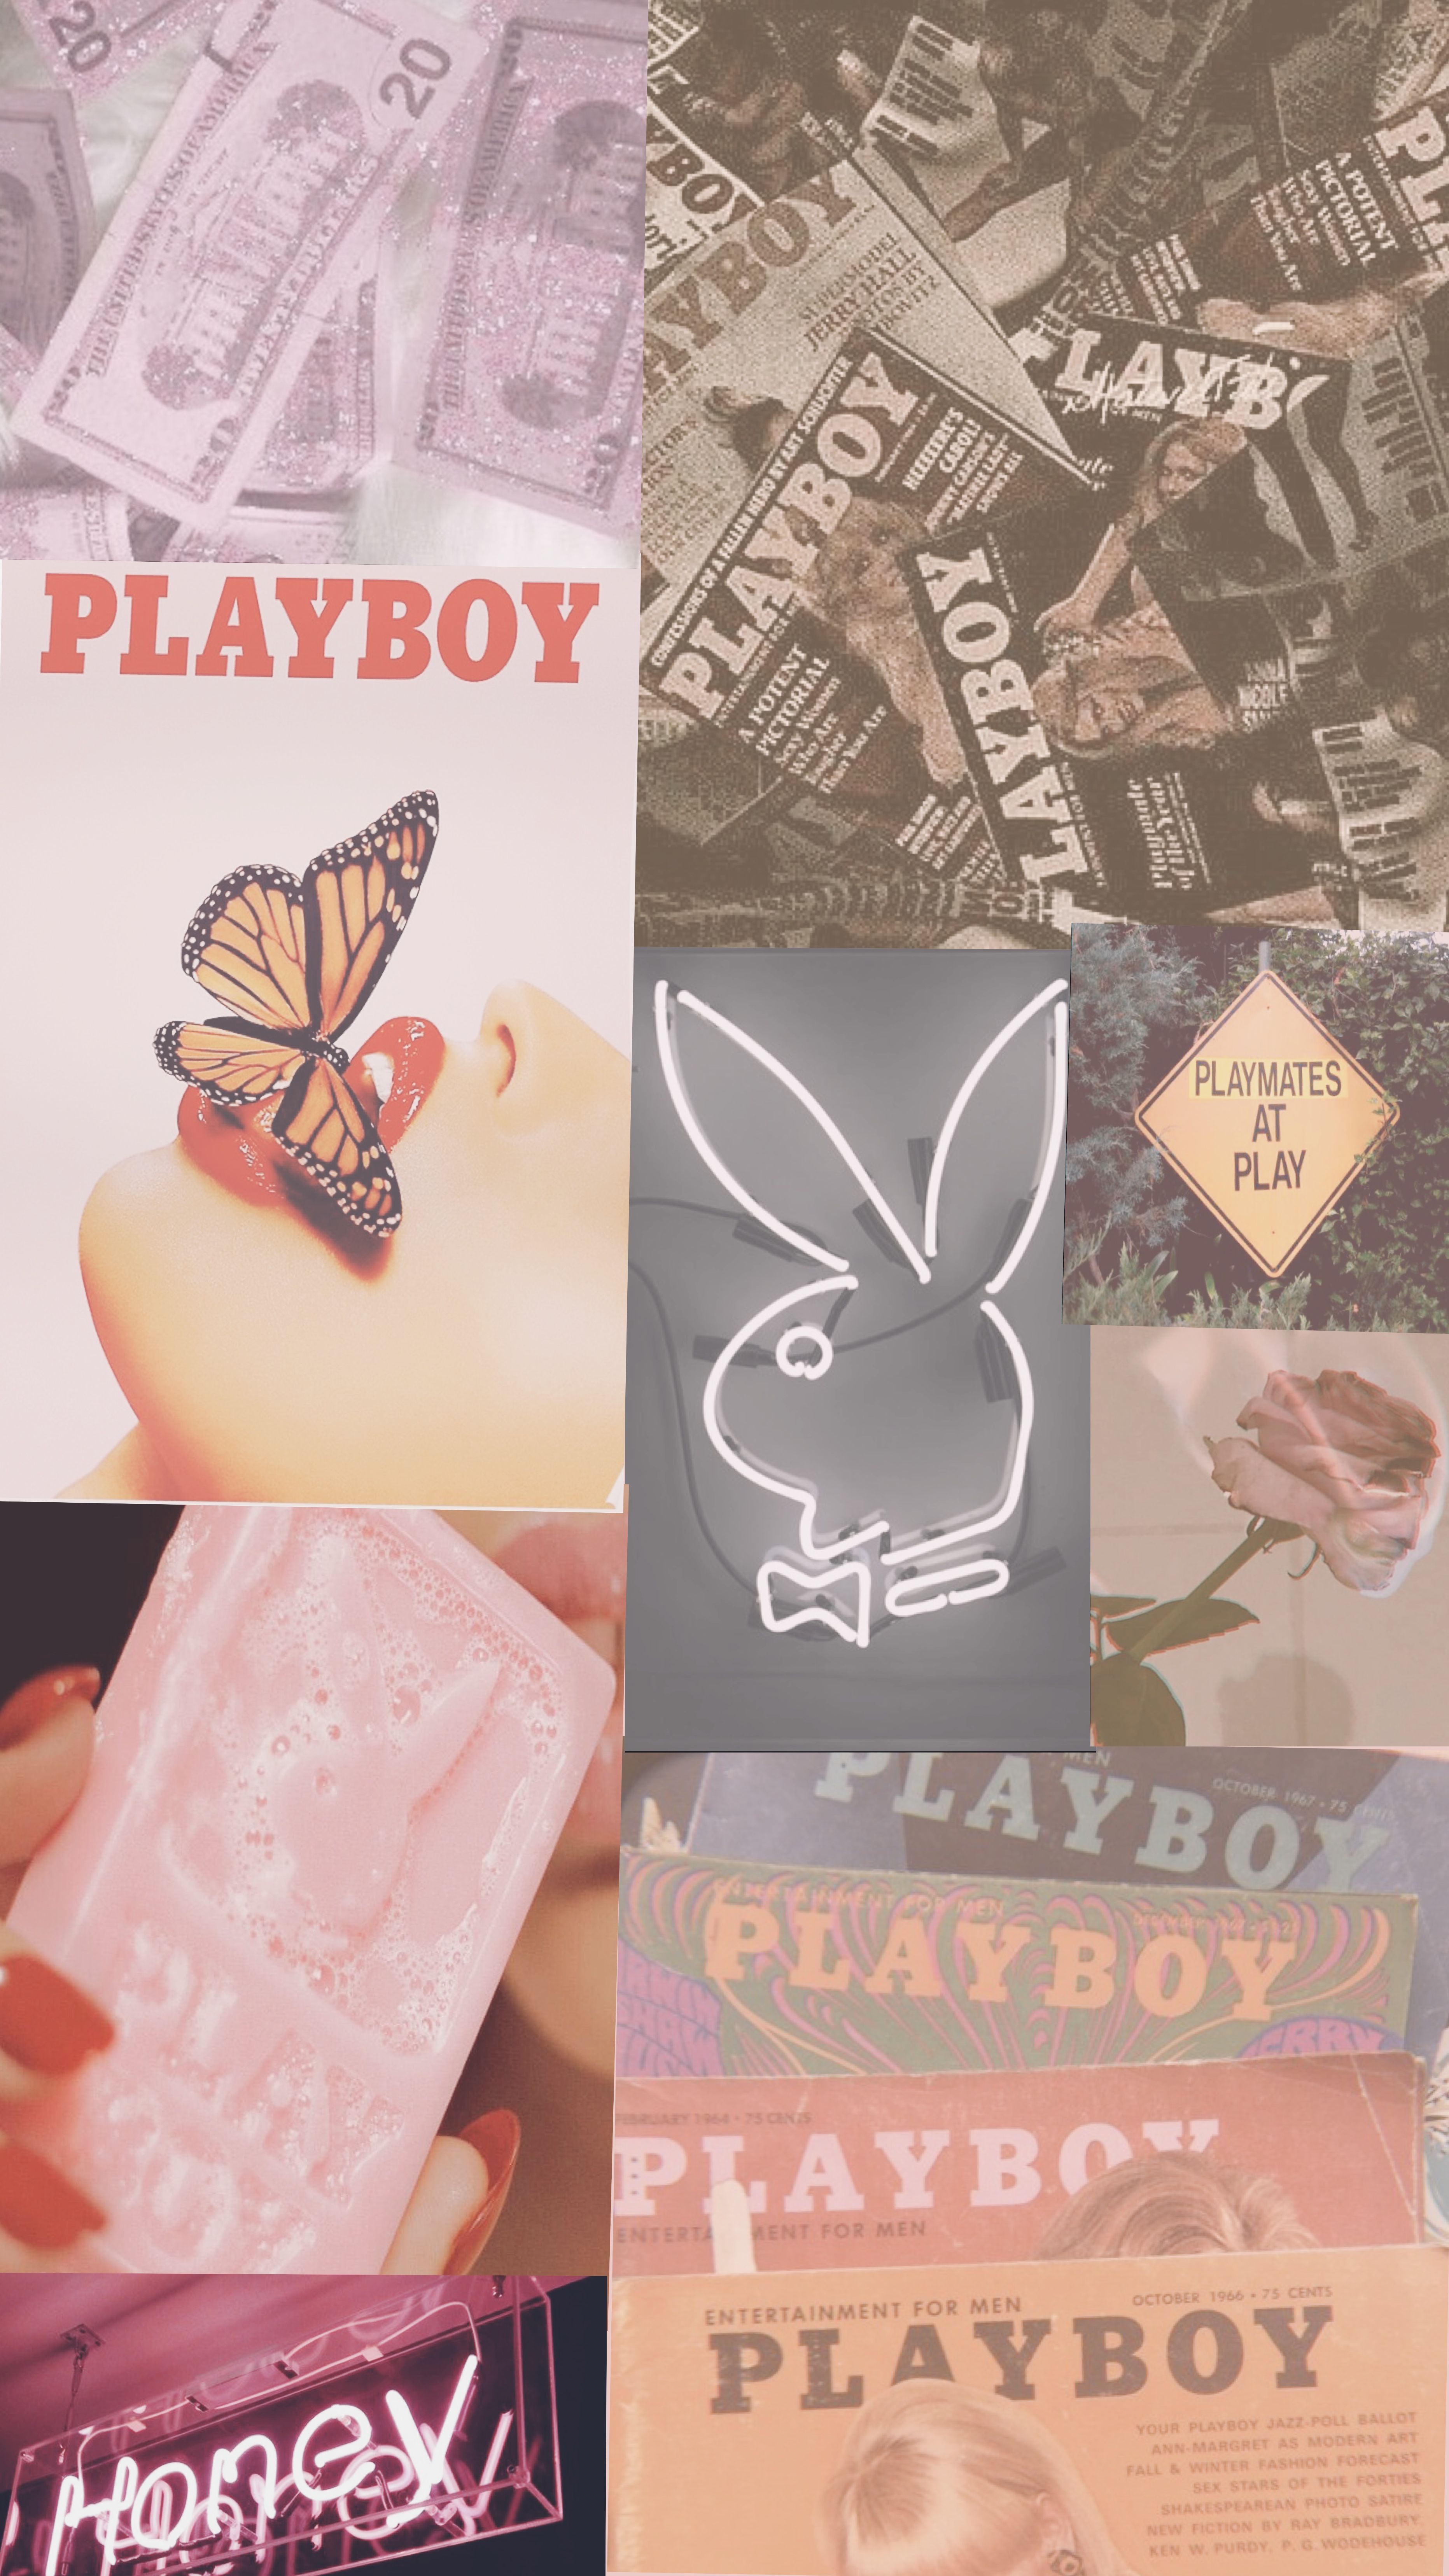 Playboy aesthetic made by Melli.016